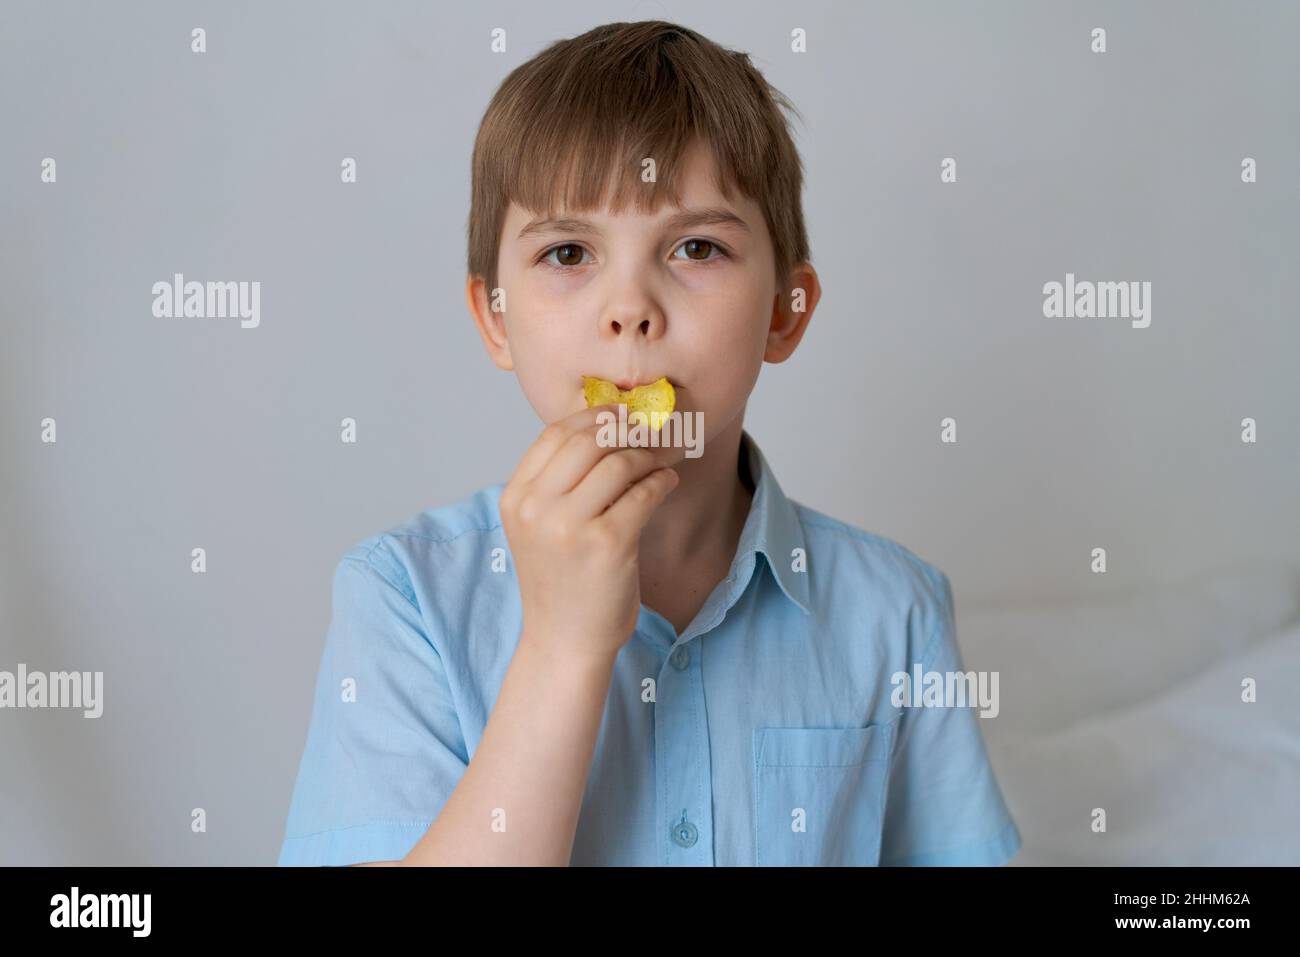 Childhood obesity concept. A little boy in blue shirt on gray background eats lot fried potato chips. Foods that cause childhood obesity. Caucasian boy looking at camera while eating Stock Photo